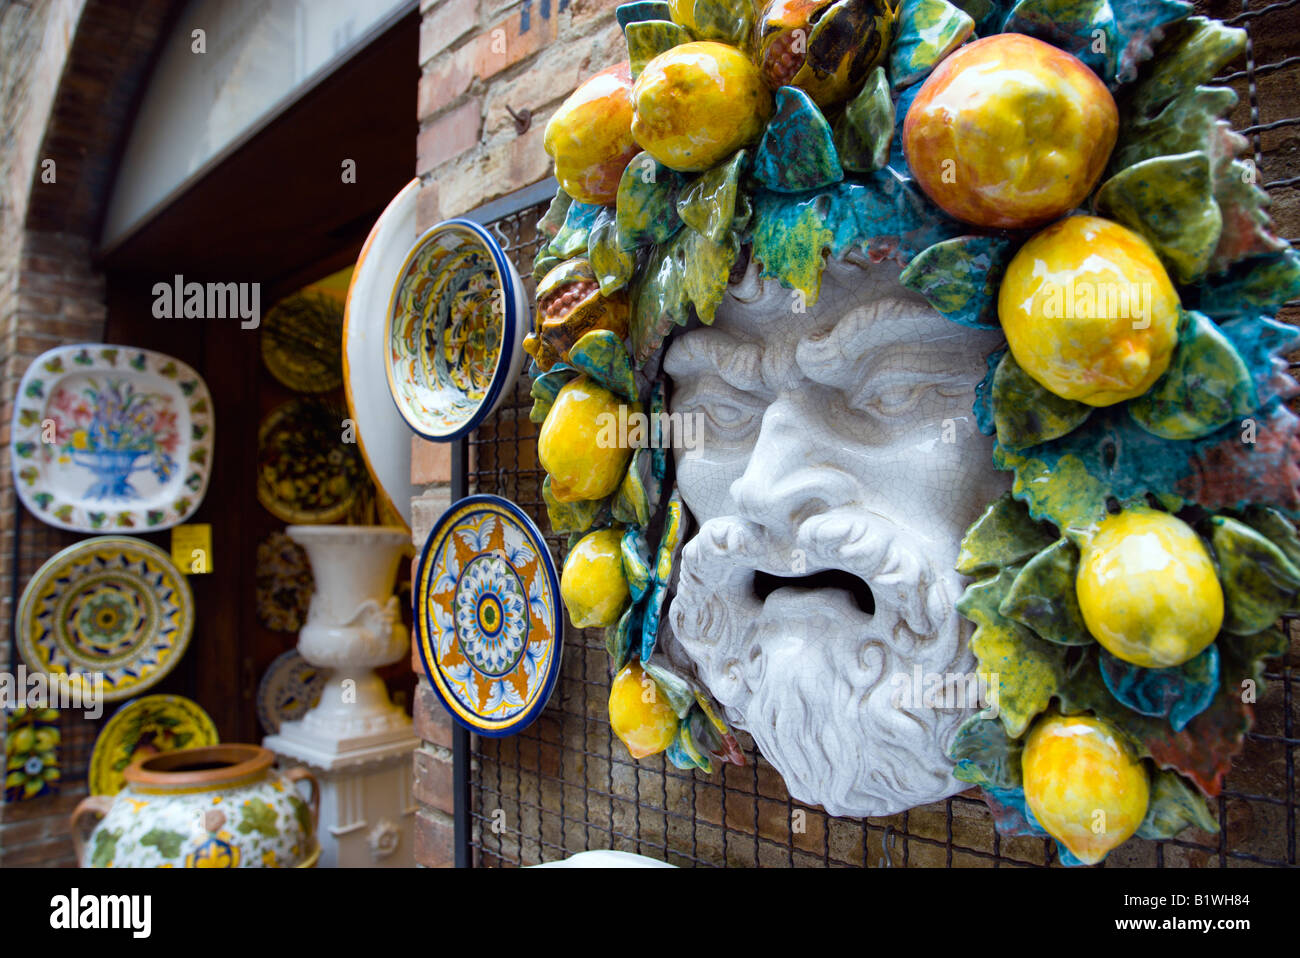 ITALY Tuscany San Gimignano Ceramics shop display of colourful plates and face of bearded man with fruit and vines in his hair Stock Photo